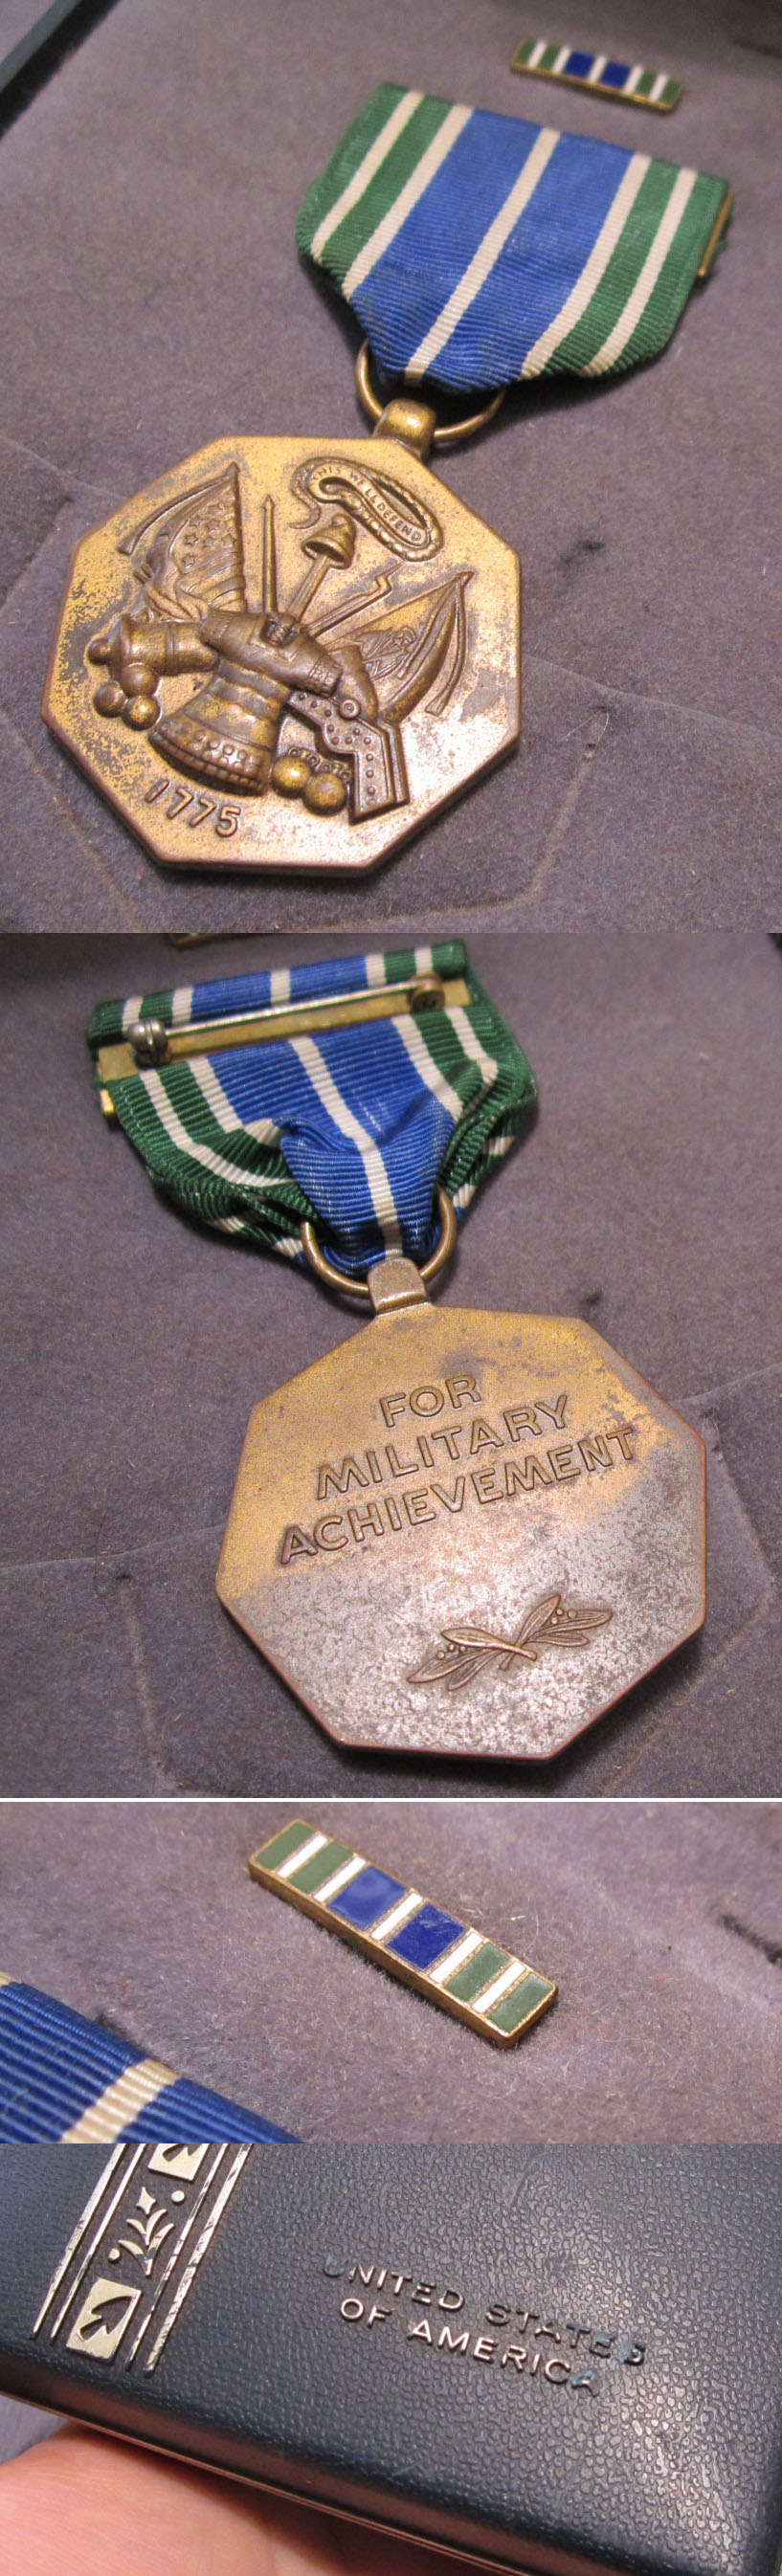 3 piece U.S. Army Medal Grouping